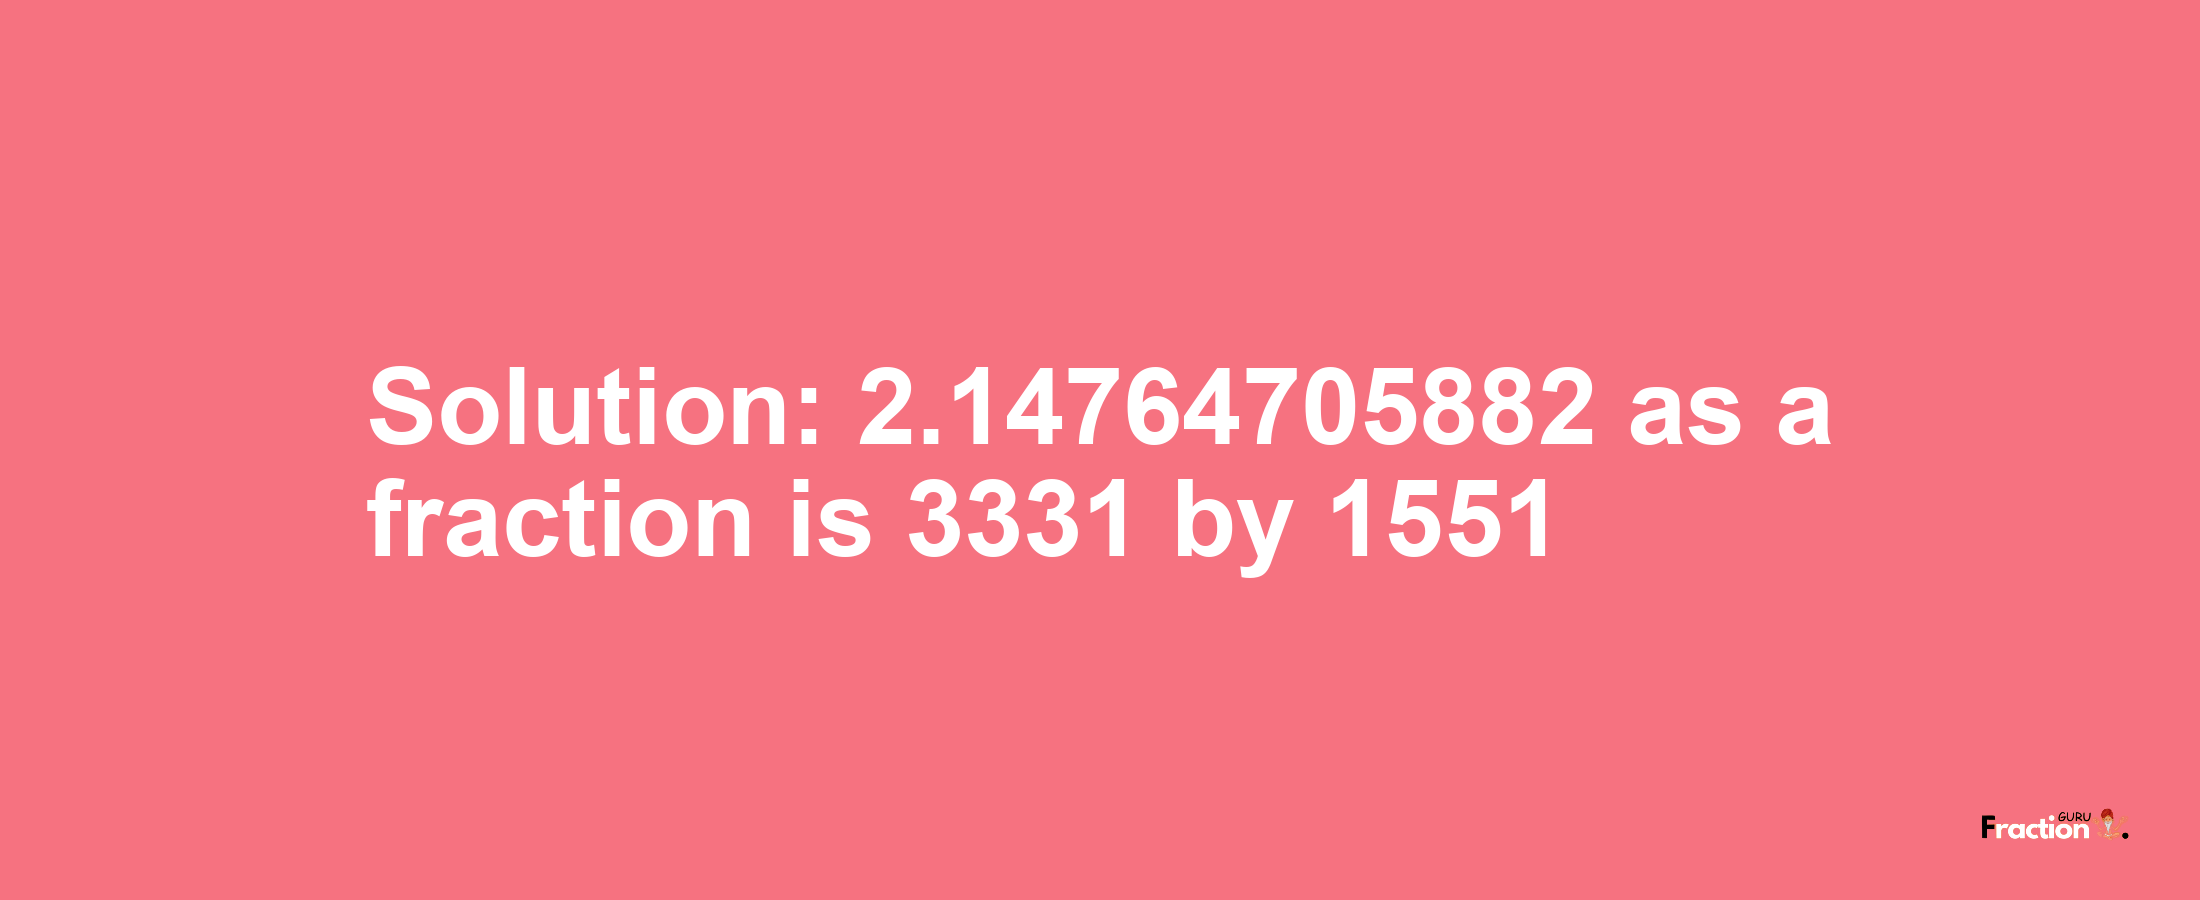 Solution:2.14764705882 as a fraction is 3331/1551